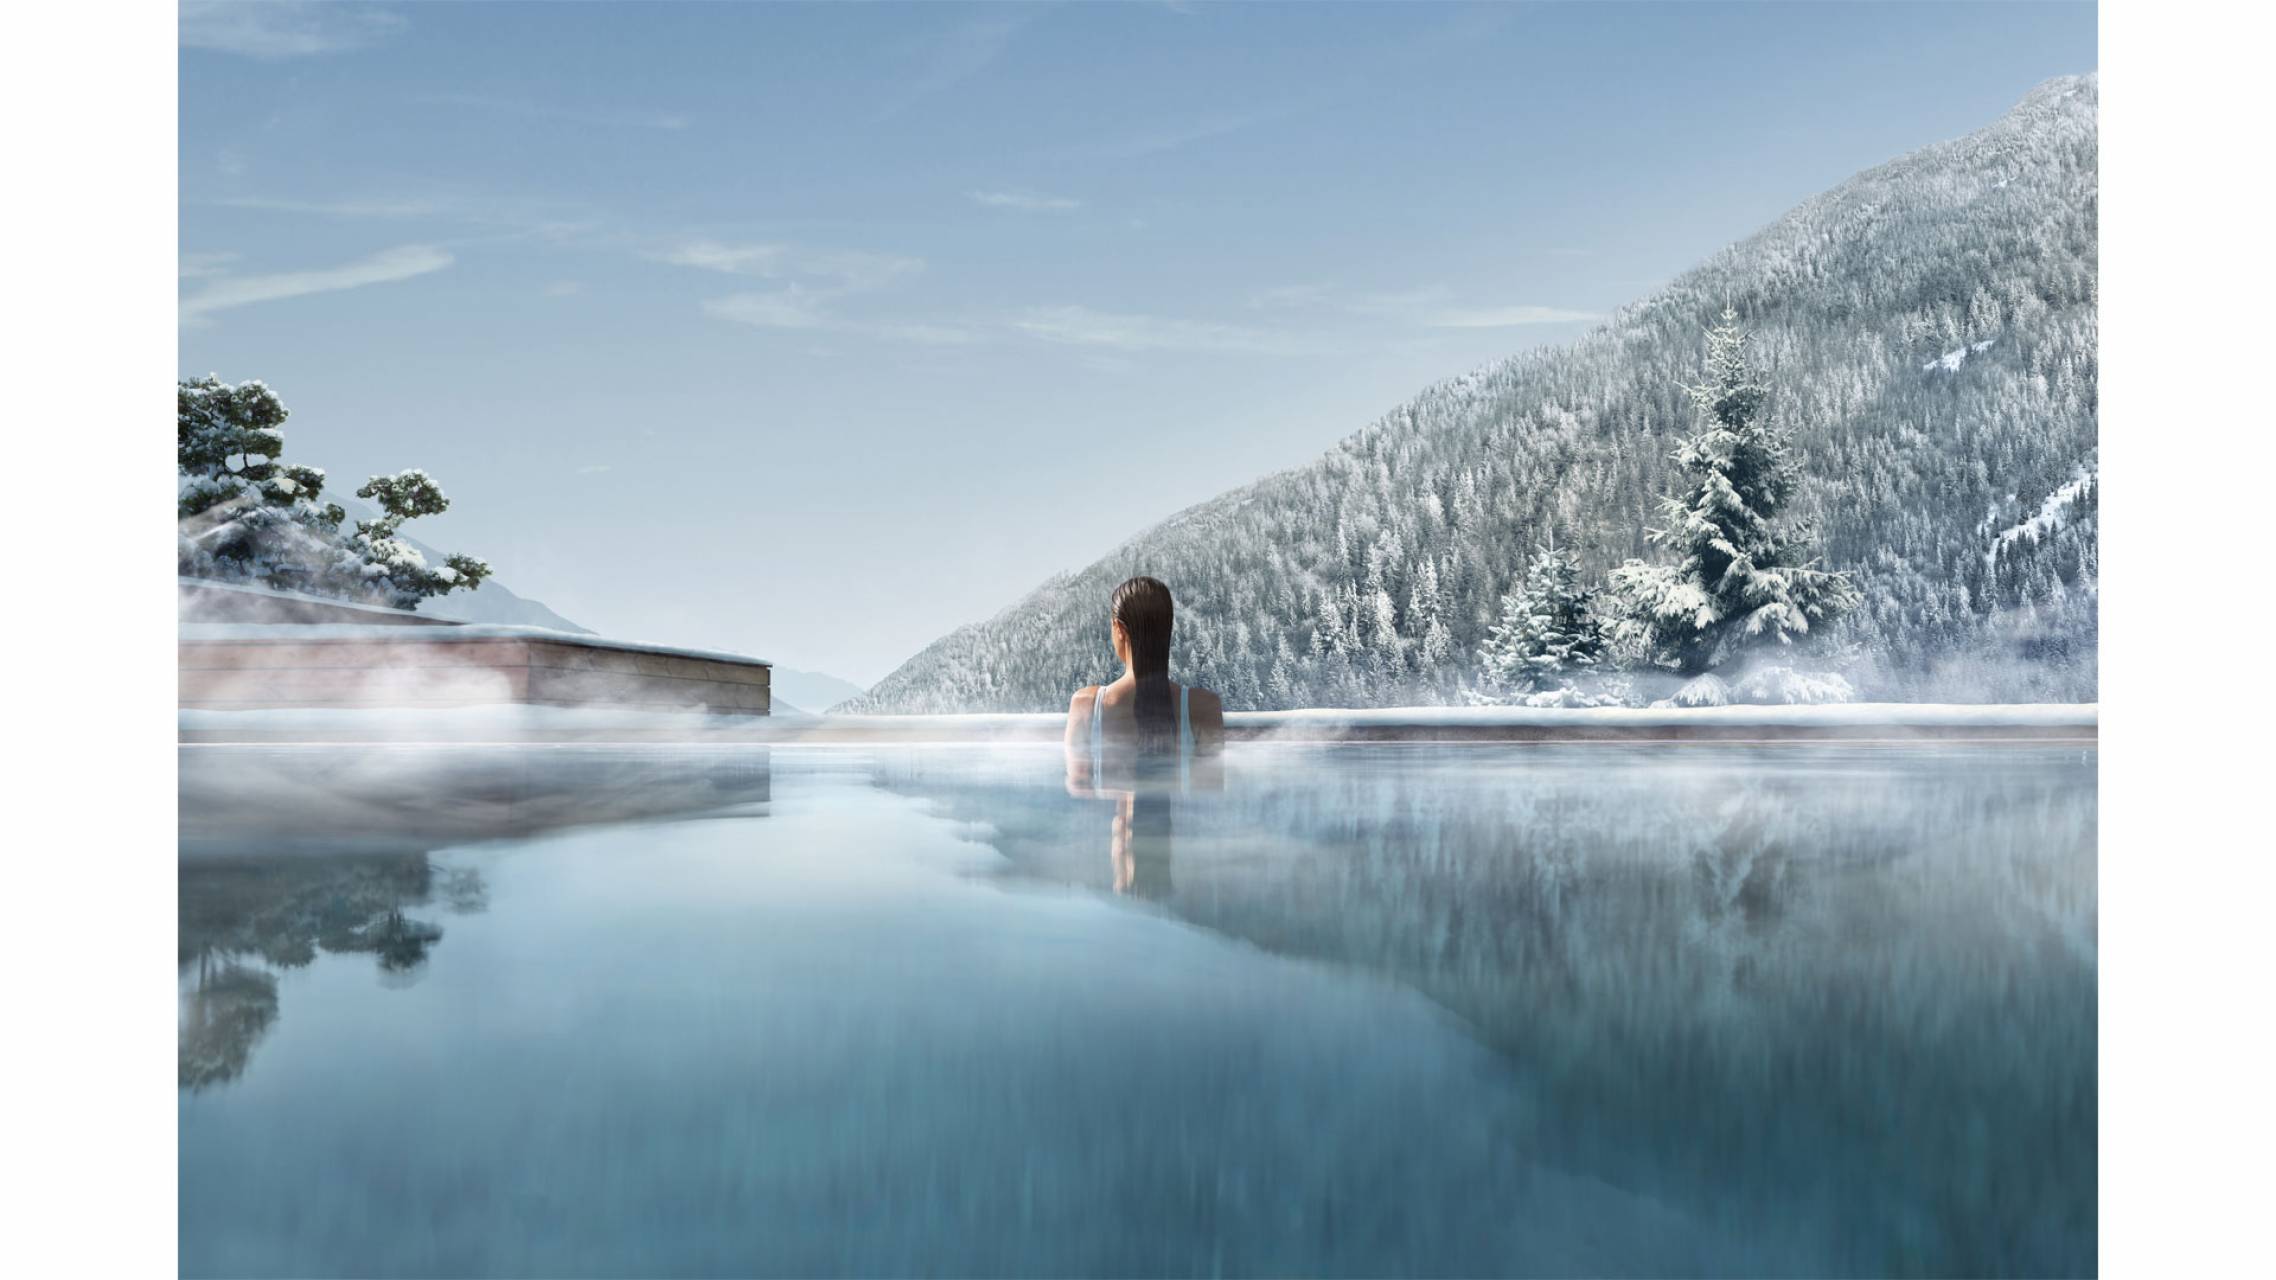 Outdoor pool with mountain view in a winter landscape 